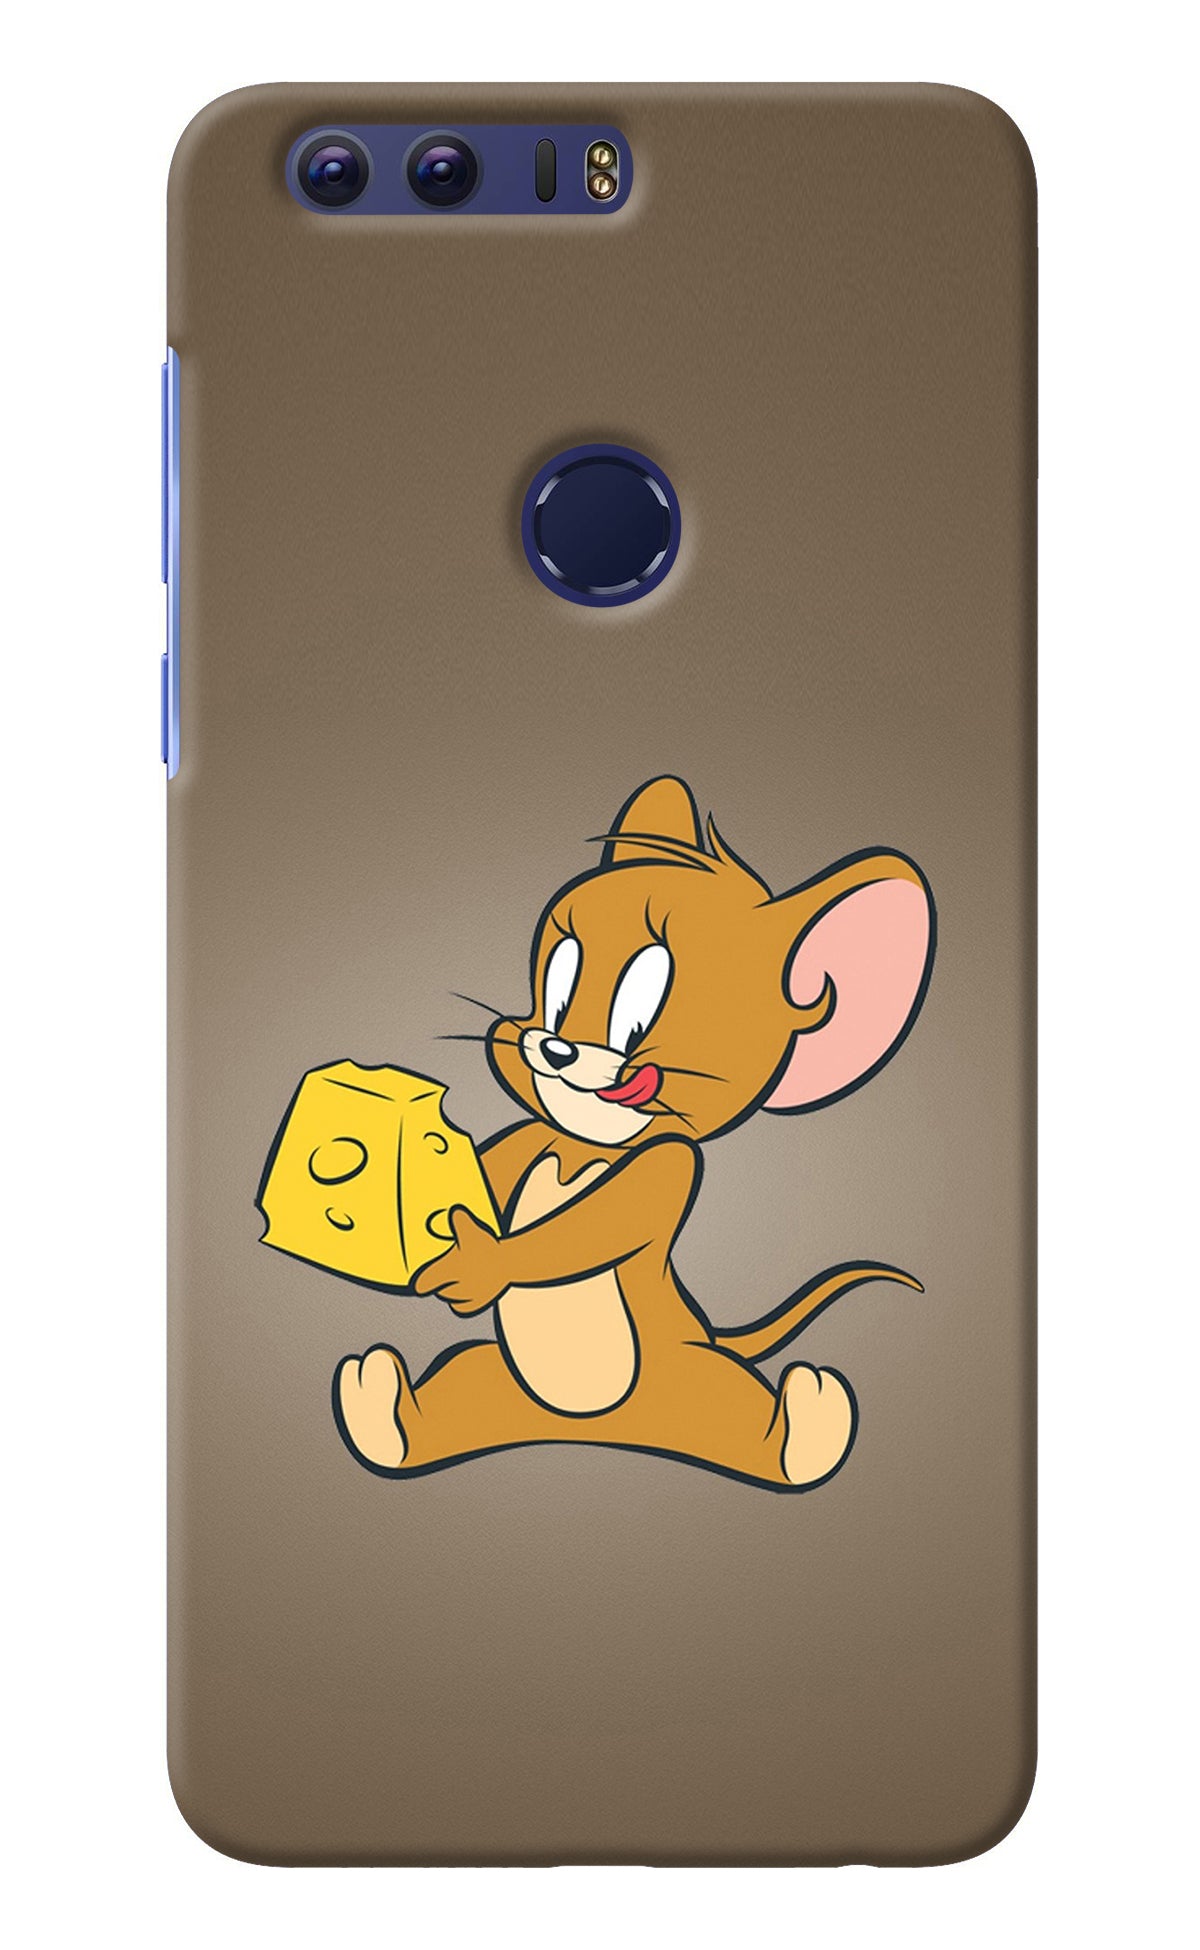 Jerry Honor 8 Back Cover